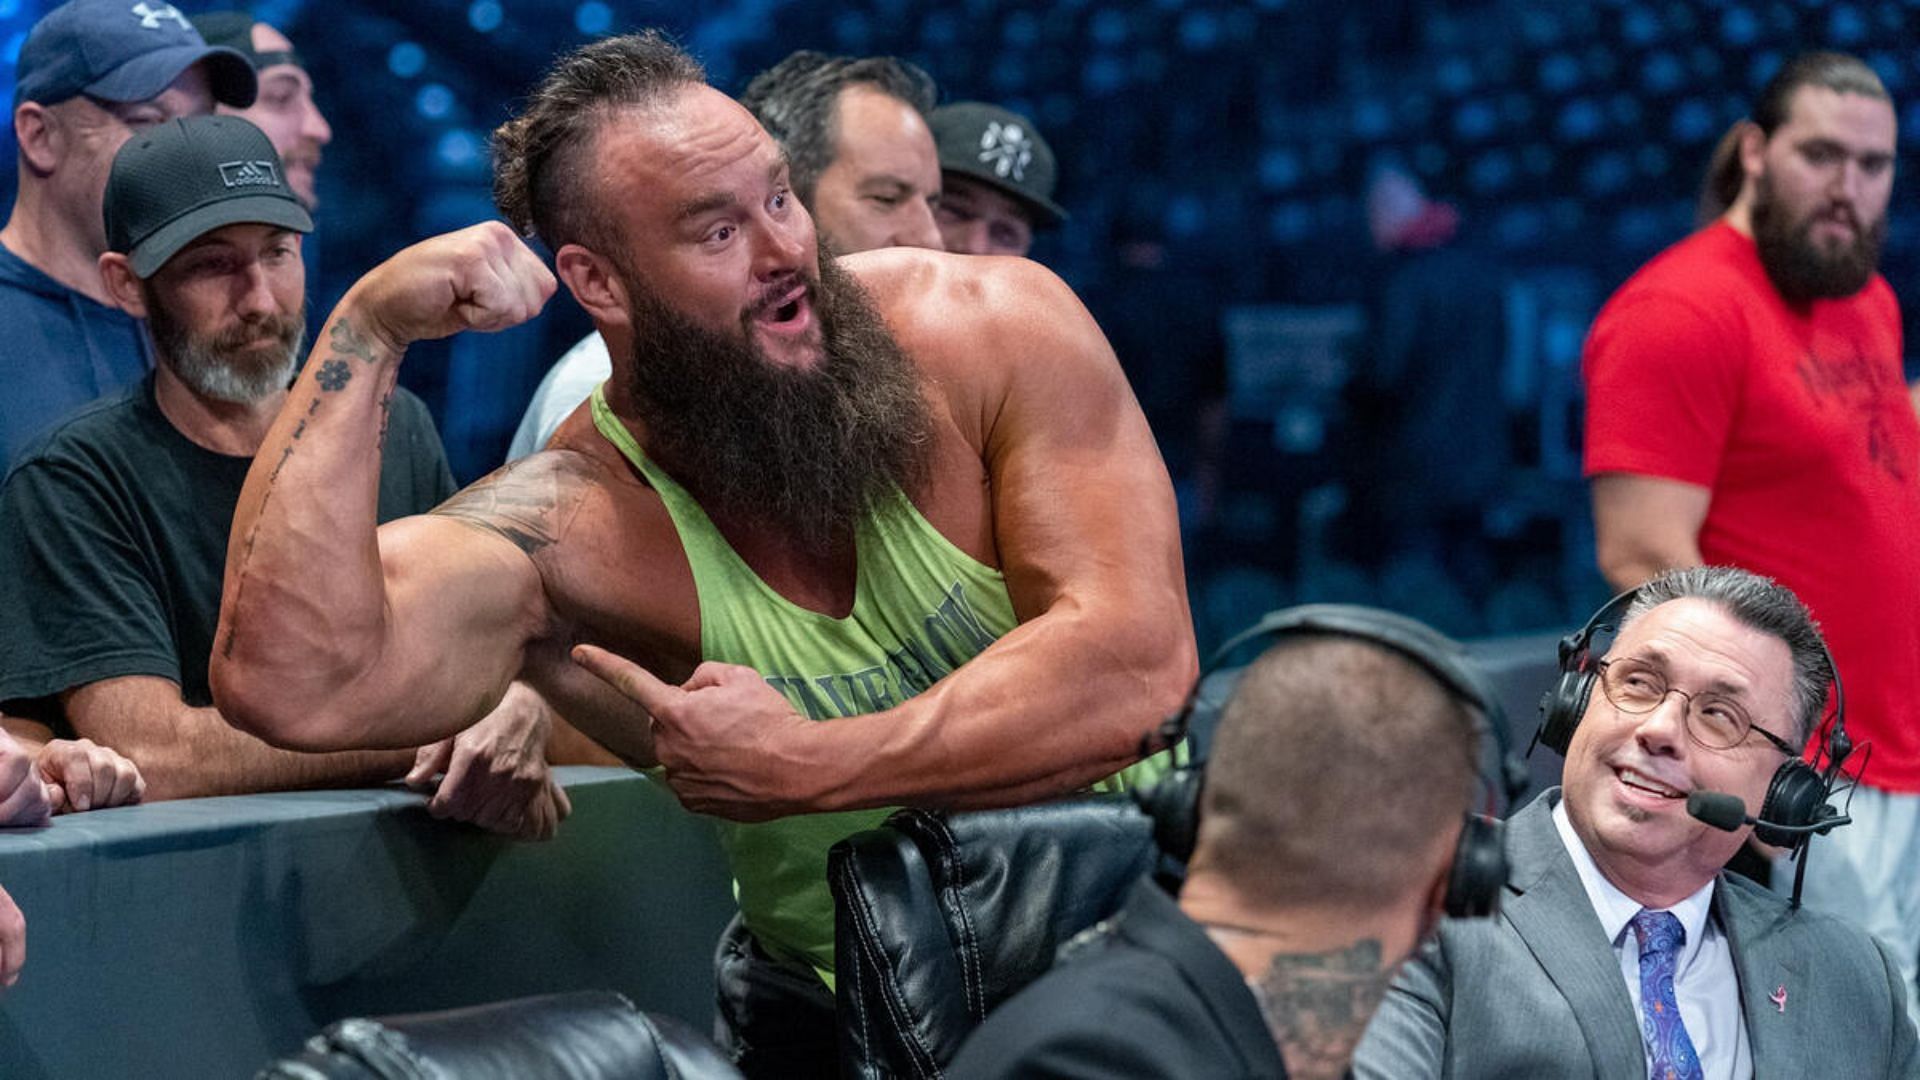 Braun Strowman is on hiatus from in-ring competition (Credit: WWE.com)